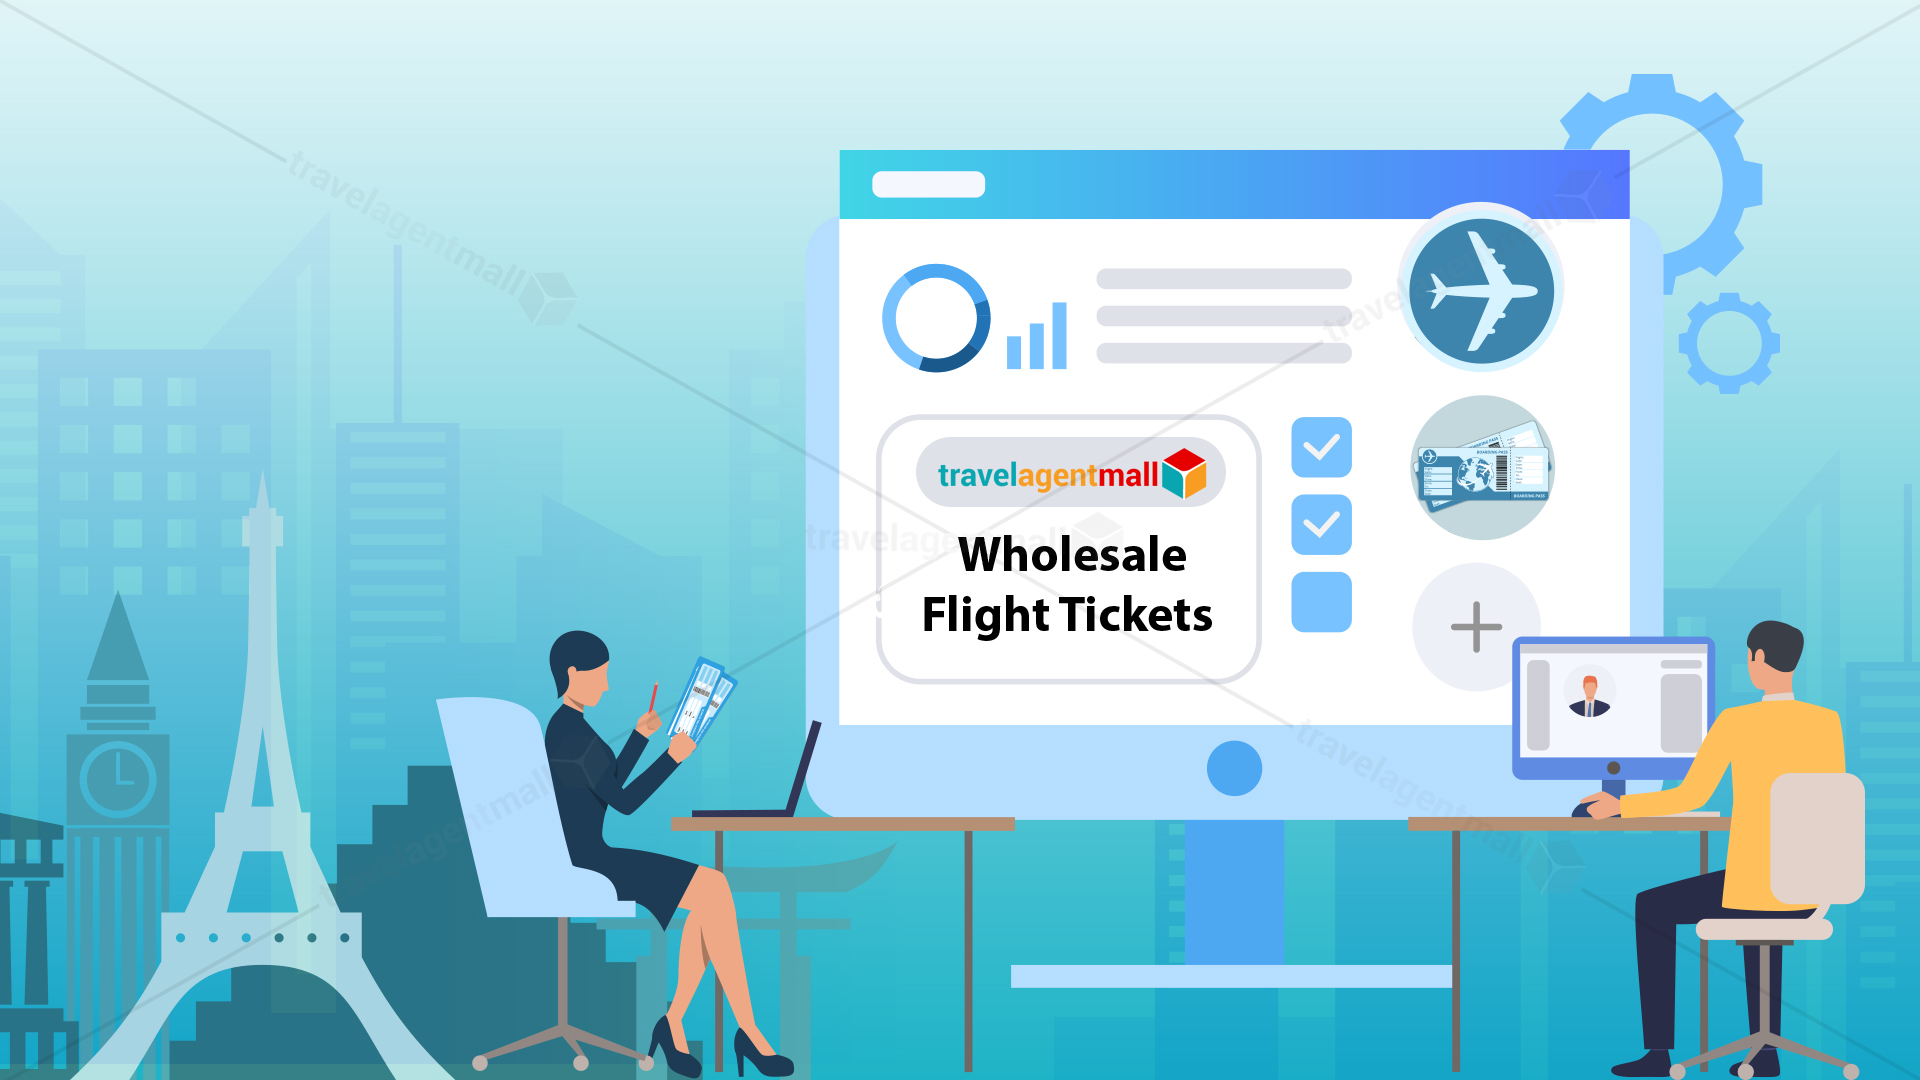 How do wholesale flight tickets get processed?